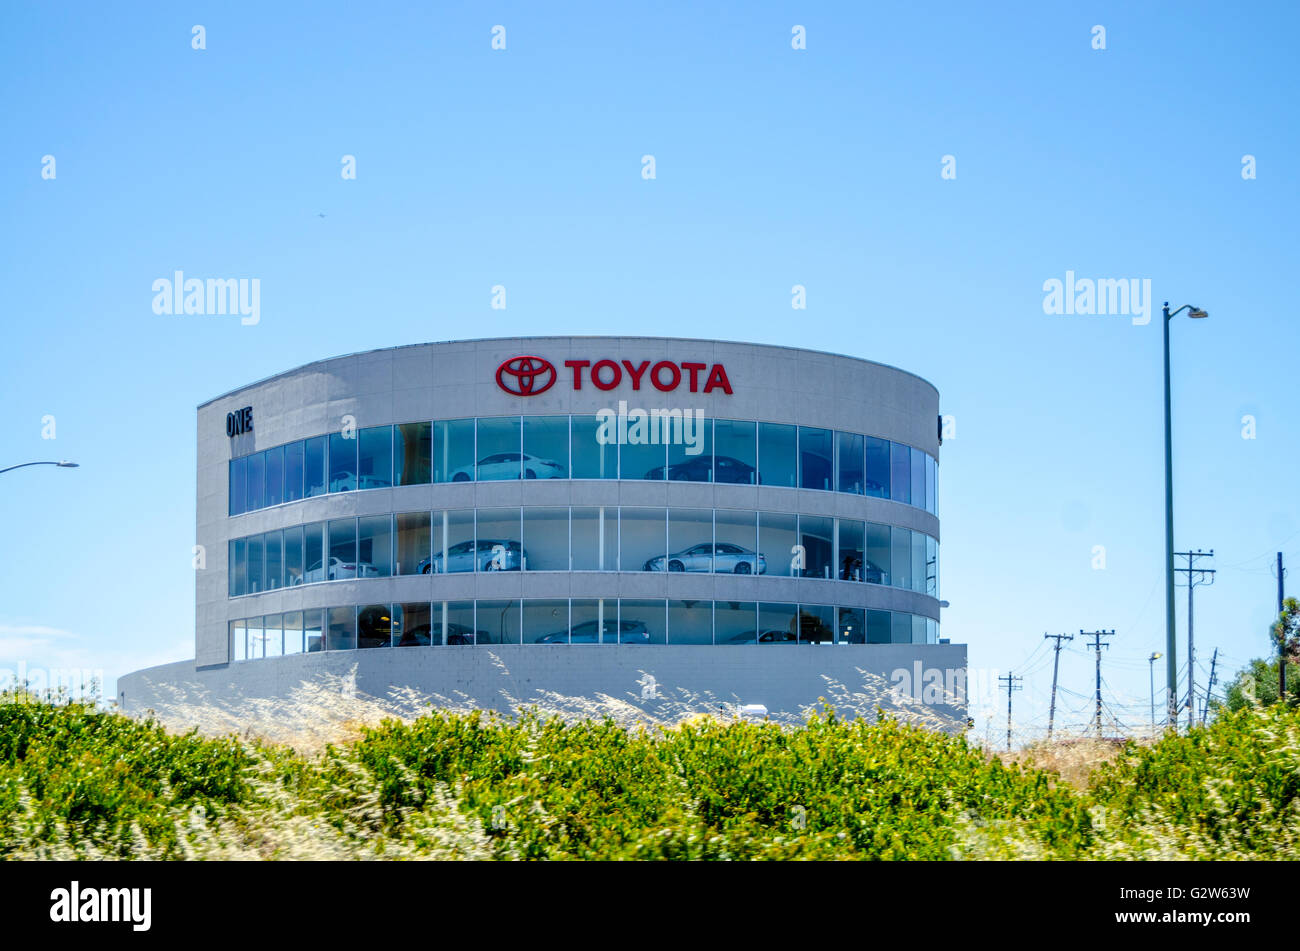 A multi story Toyota Dealership in Oakland California Stock Photo